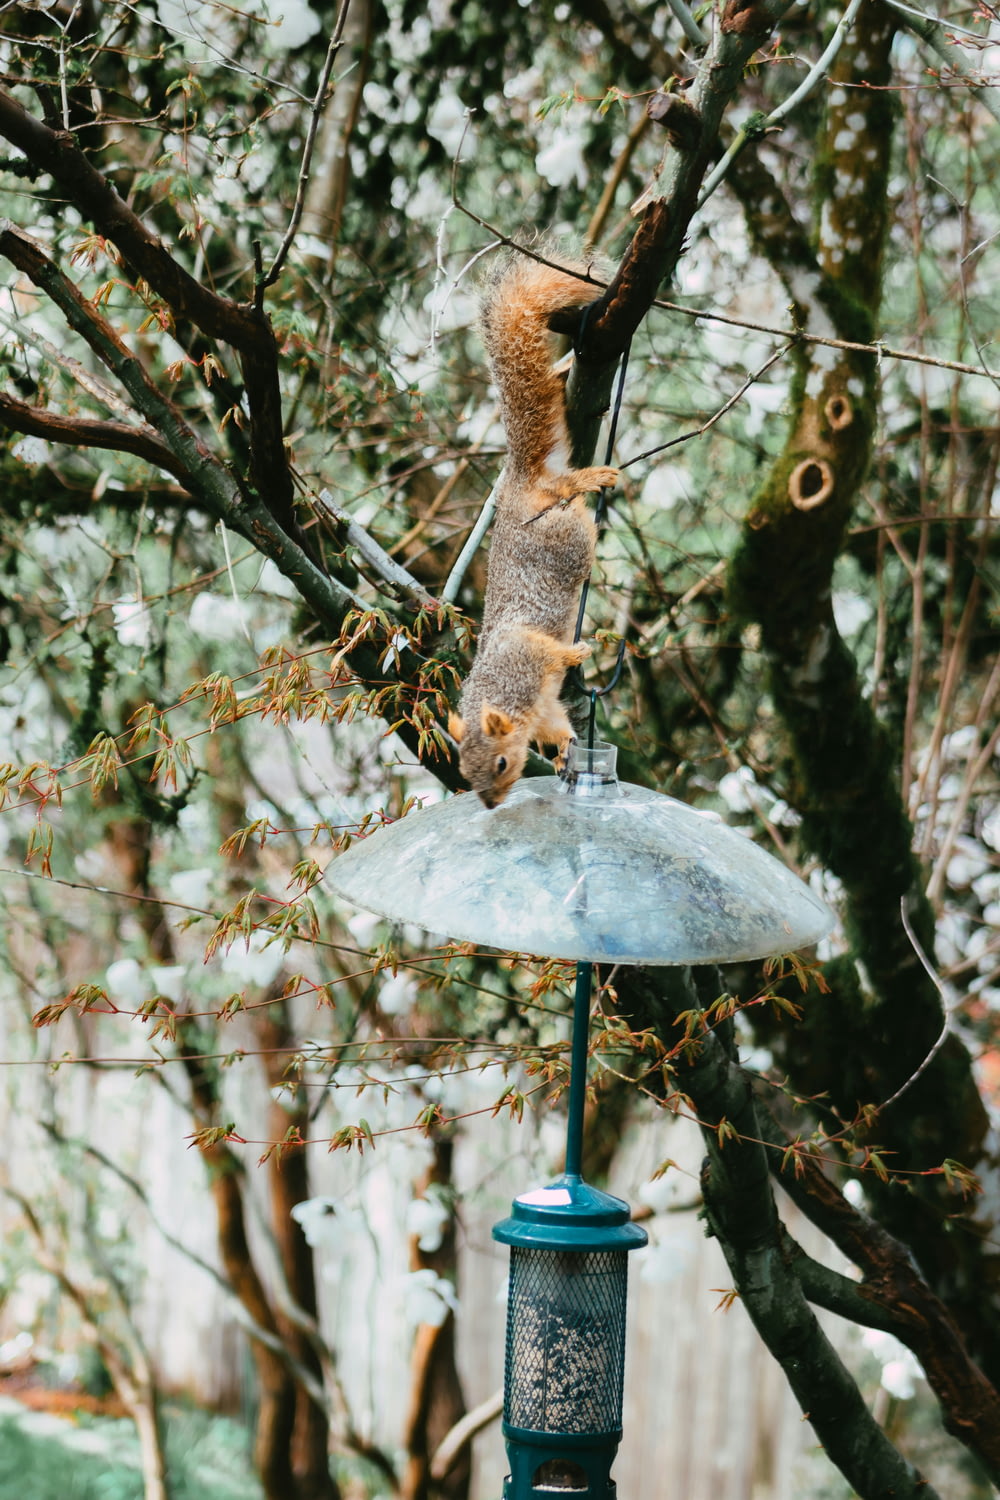 a squirrel on top of a bird feeder in a tree